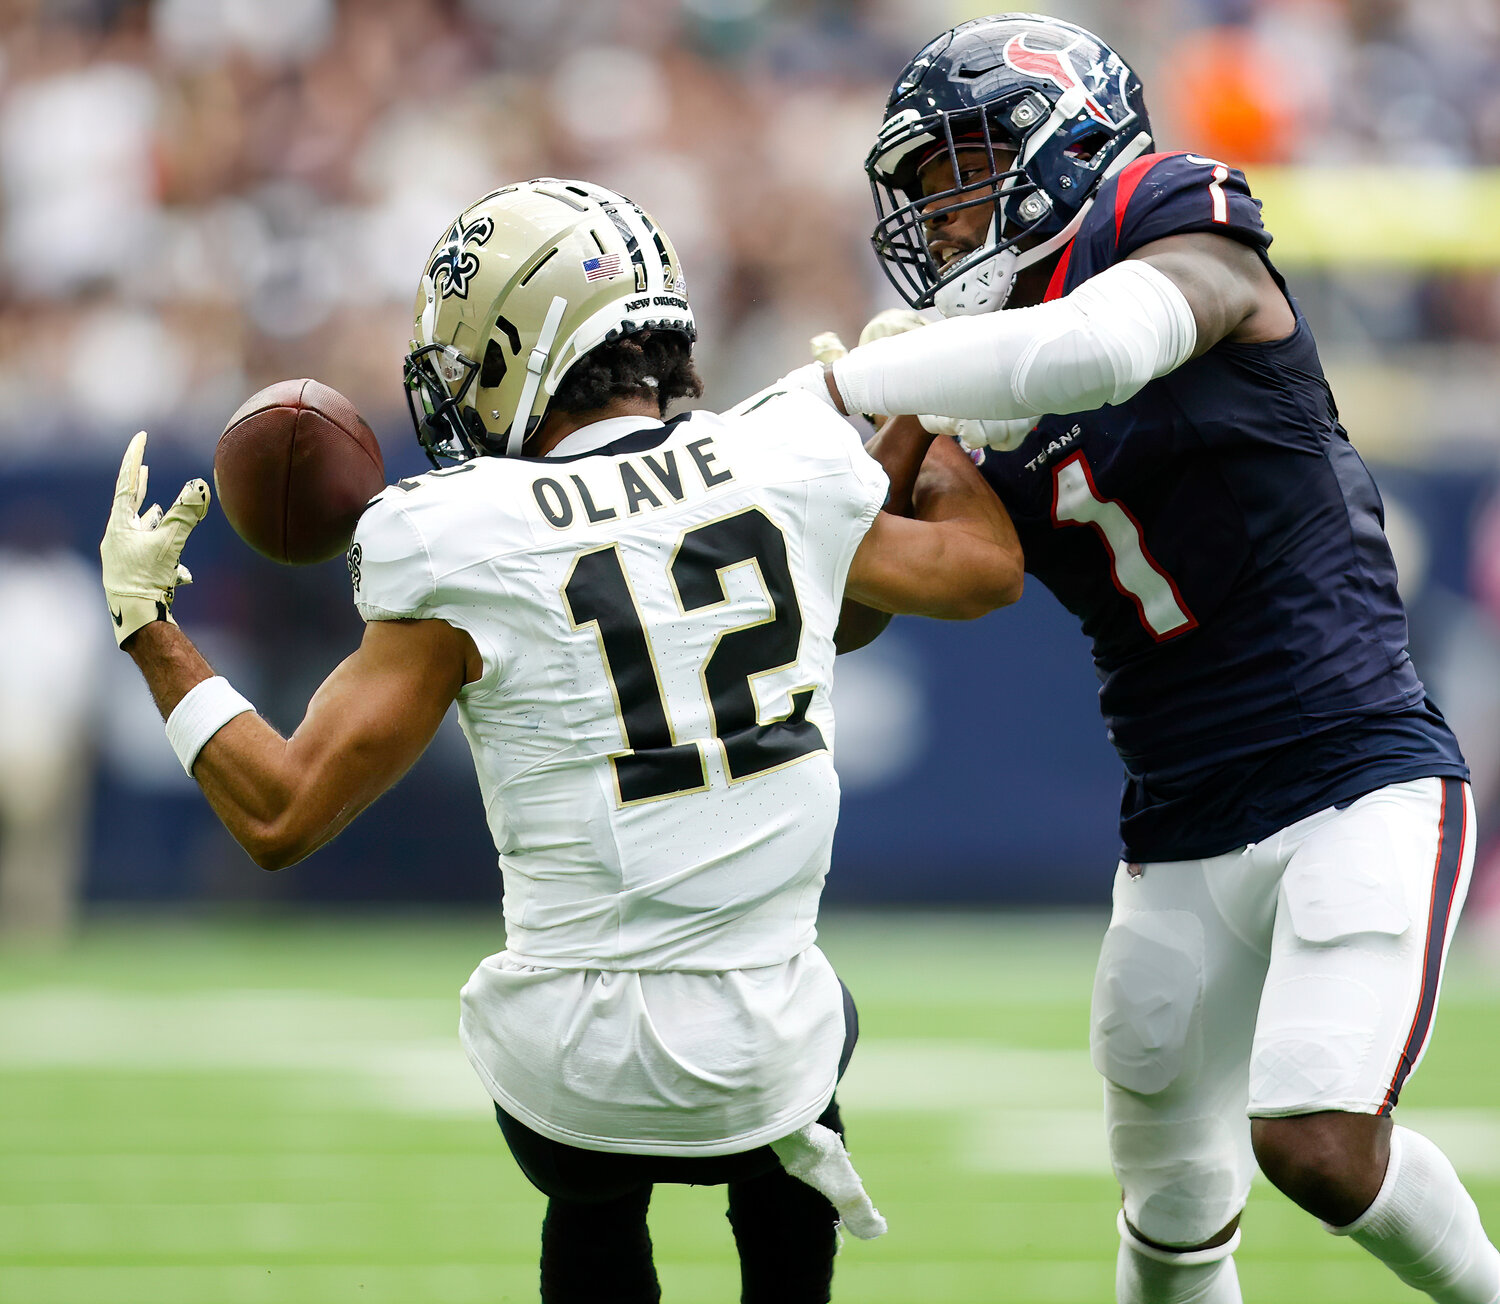 Saints wide receiver Chris Olave (12) brings in a 24-yard pass over Texans safety Jimmie Ward (1) for a first down at the Texans’ 14-yard line during an NFL game between the Texans and the Saints on October 15, 2023 in Houston. The Texans won, 20-13.